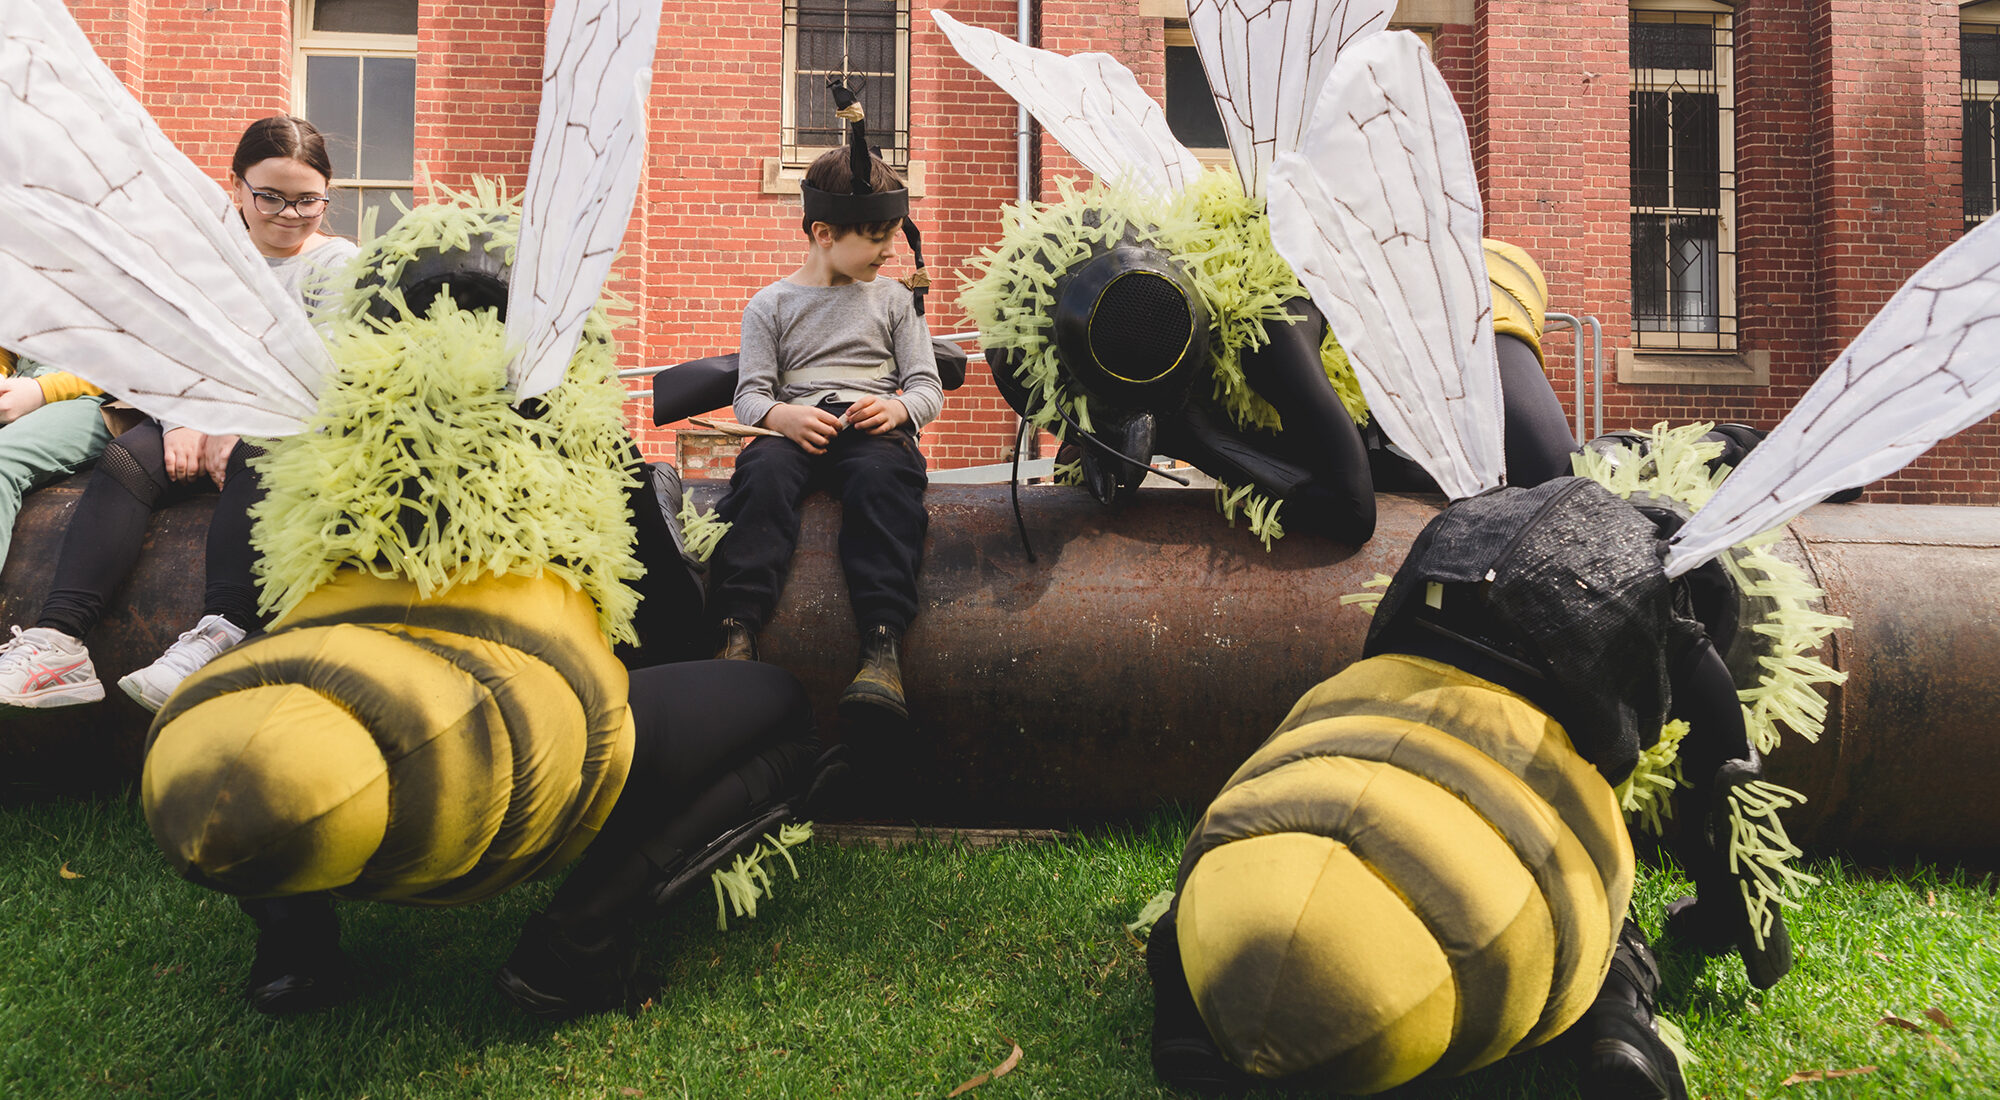 A child sat next to some bees.